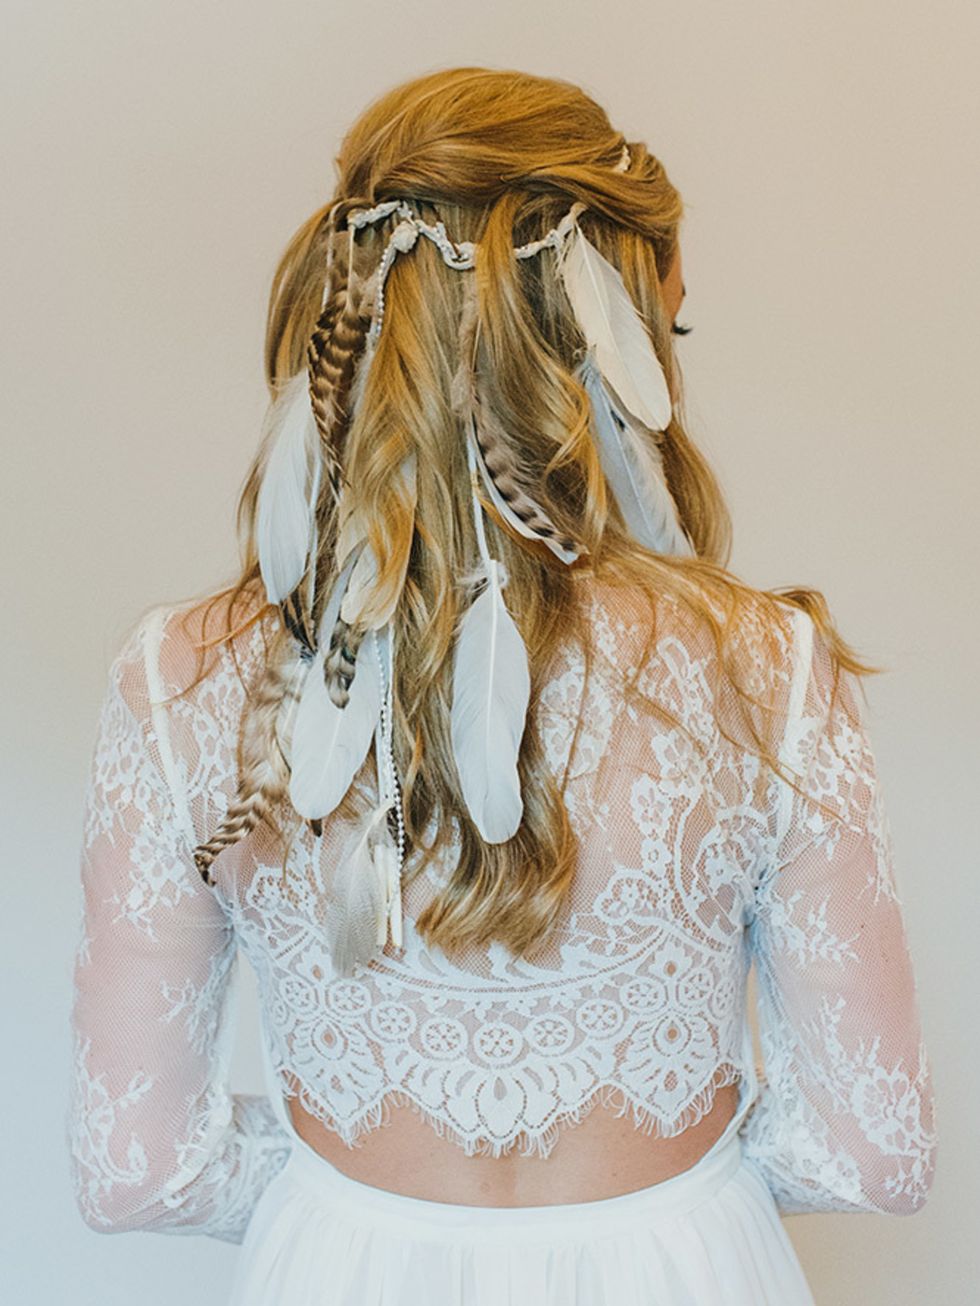 <p>My hairdresser was Lauren Brinklow, and I had the feather head-dress custom made by a seller on <a href="https://www.etsy.com/?utm_source=google&utm_medium=sem&utm_term=etsy_e&utm_campaign=uk_Brand_ST_Exact_etsy&gclid=CNmwlYXozcMCFebItAodpi4ALw" target